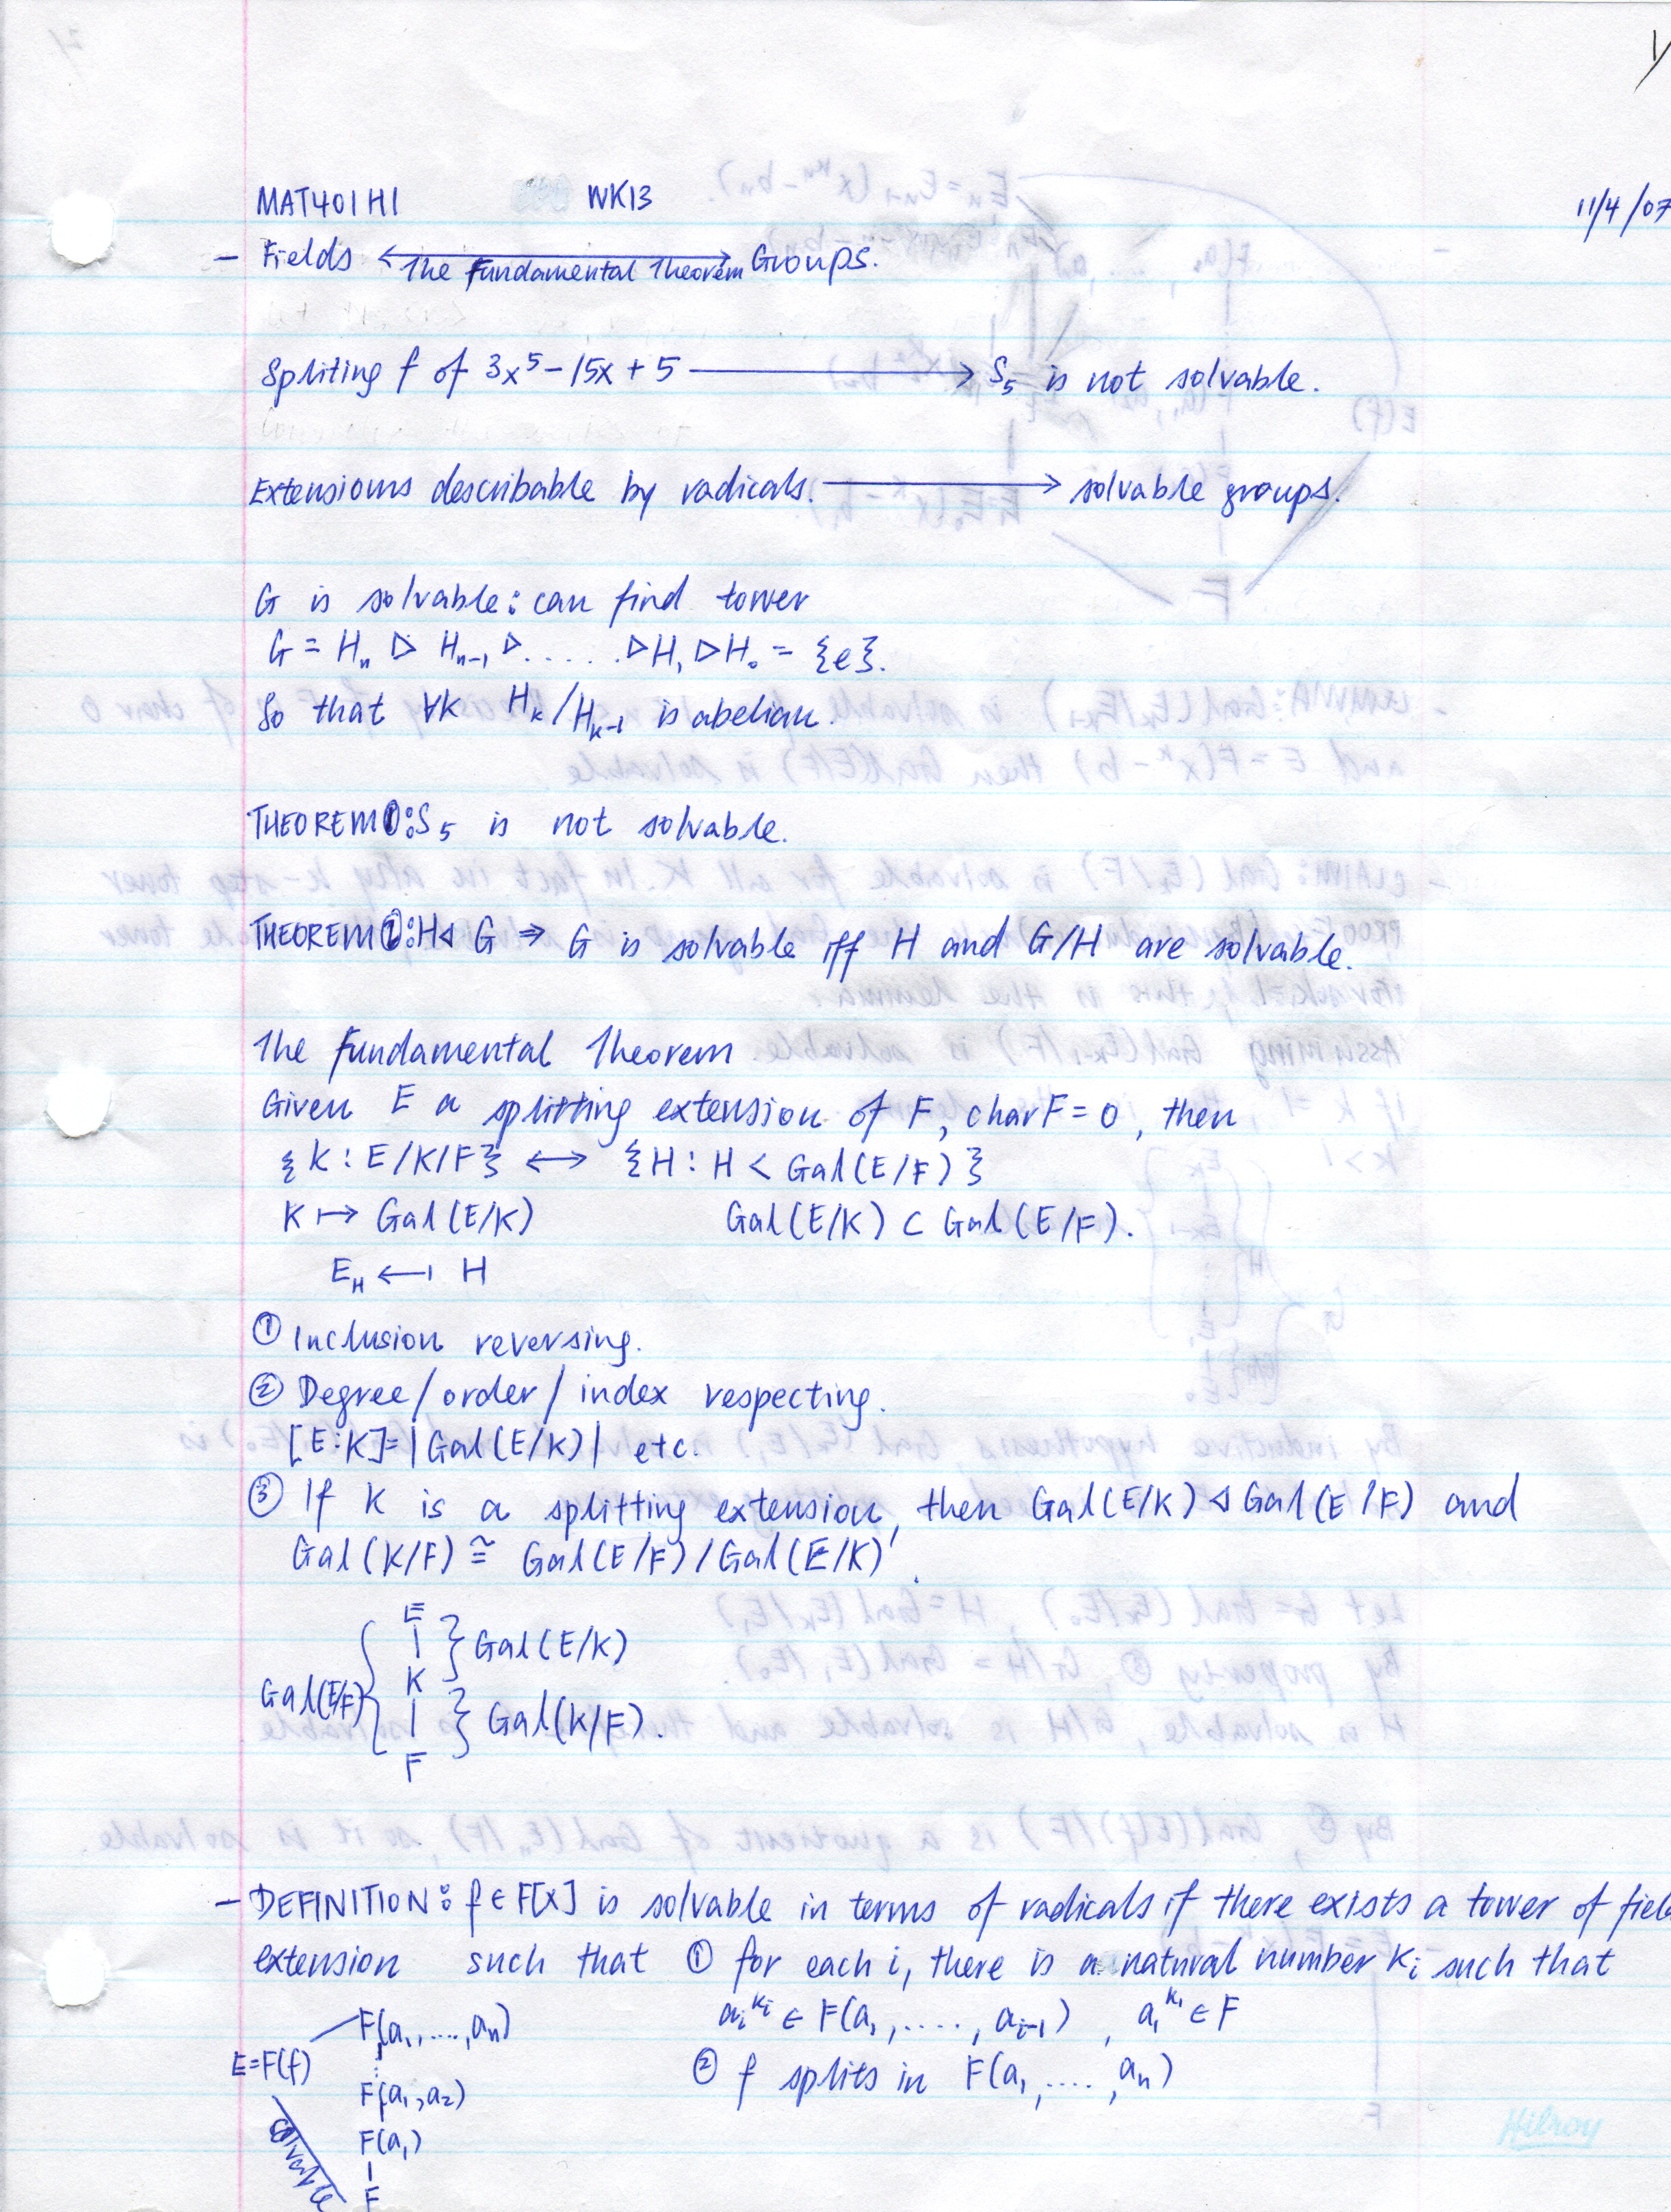 07-401 lecture 13 pg 1.jpg